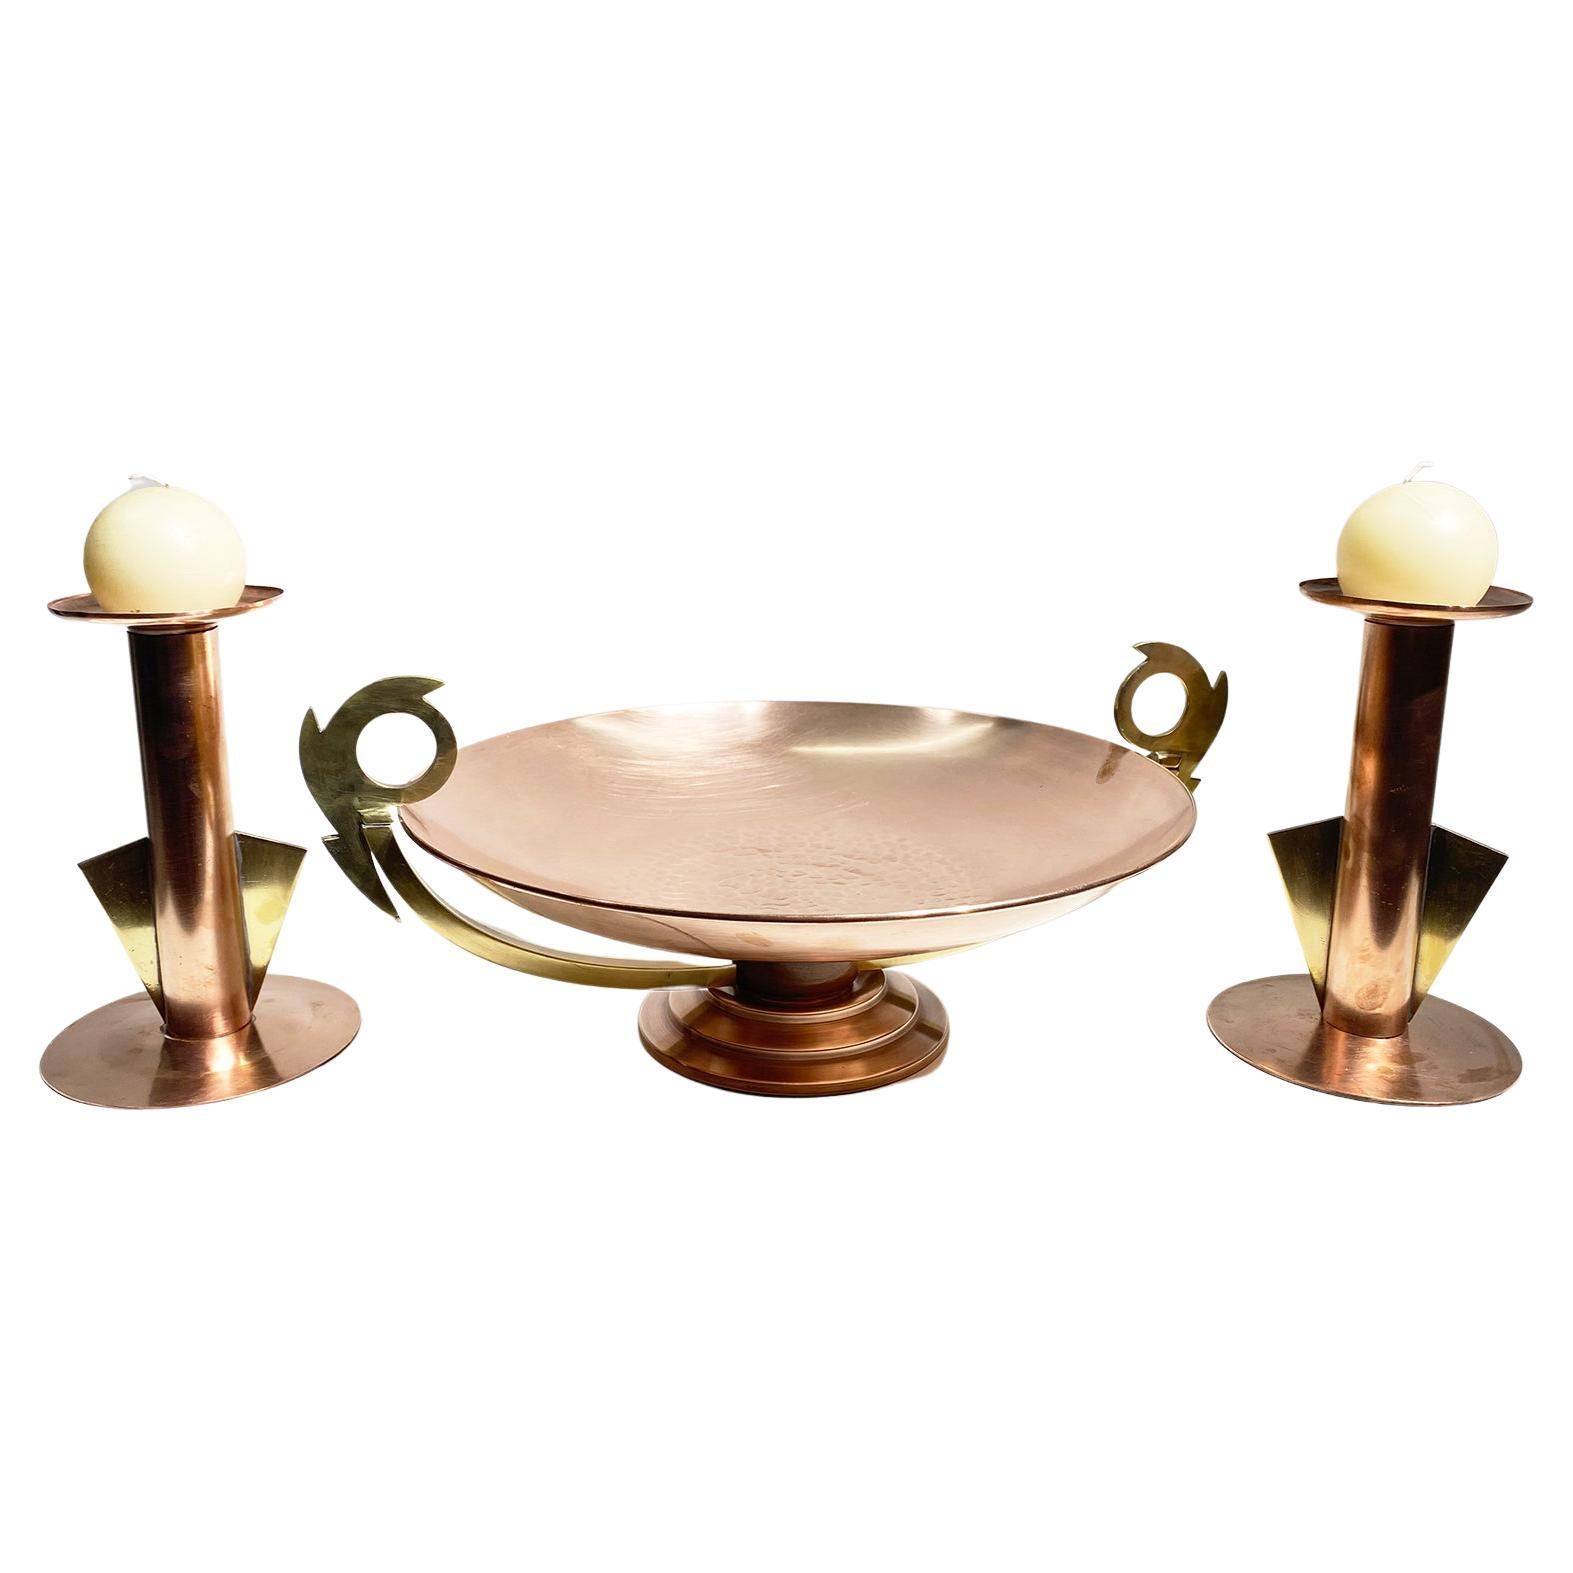 Late 19th Century Hand-Hammered Copper Tray with Candle Holders